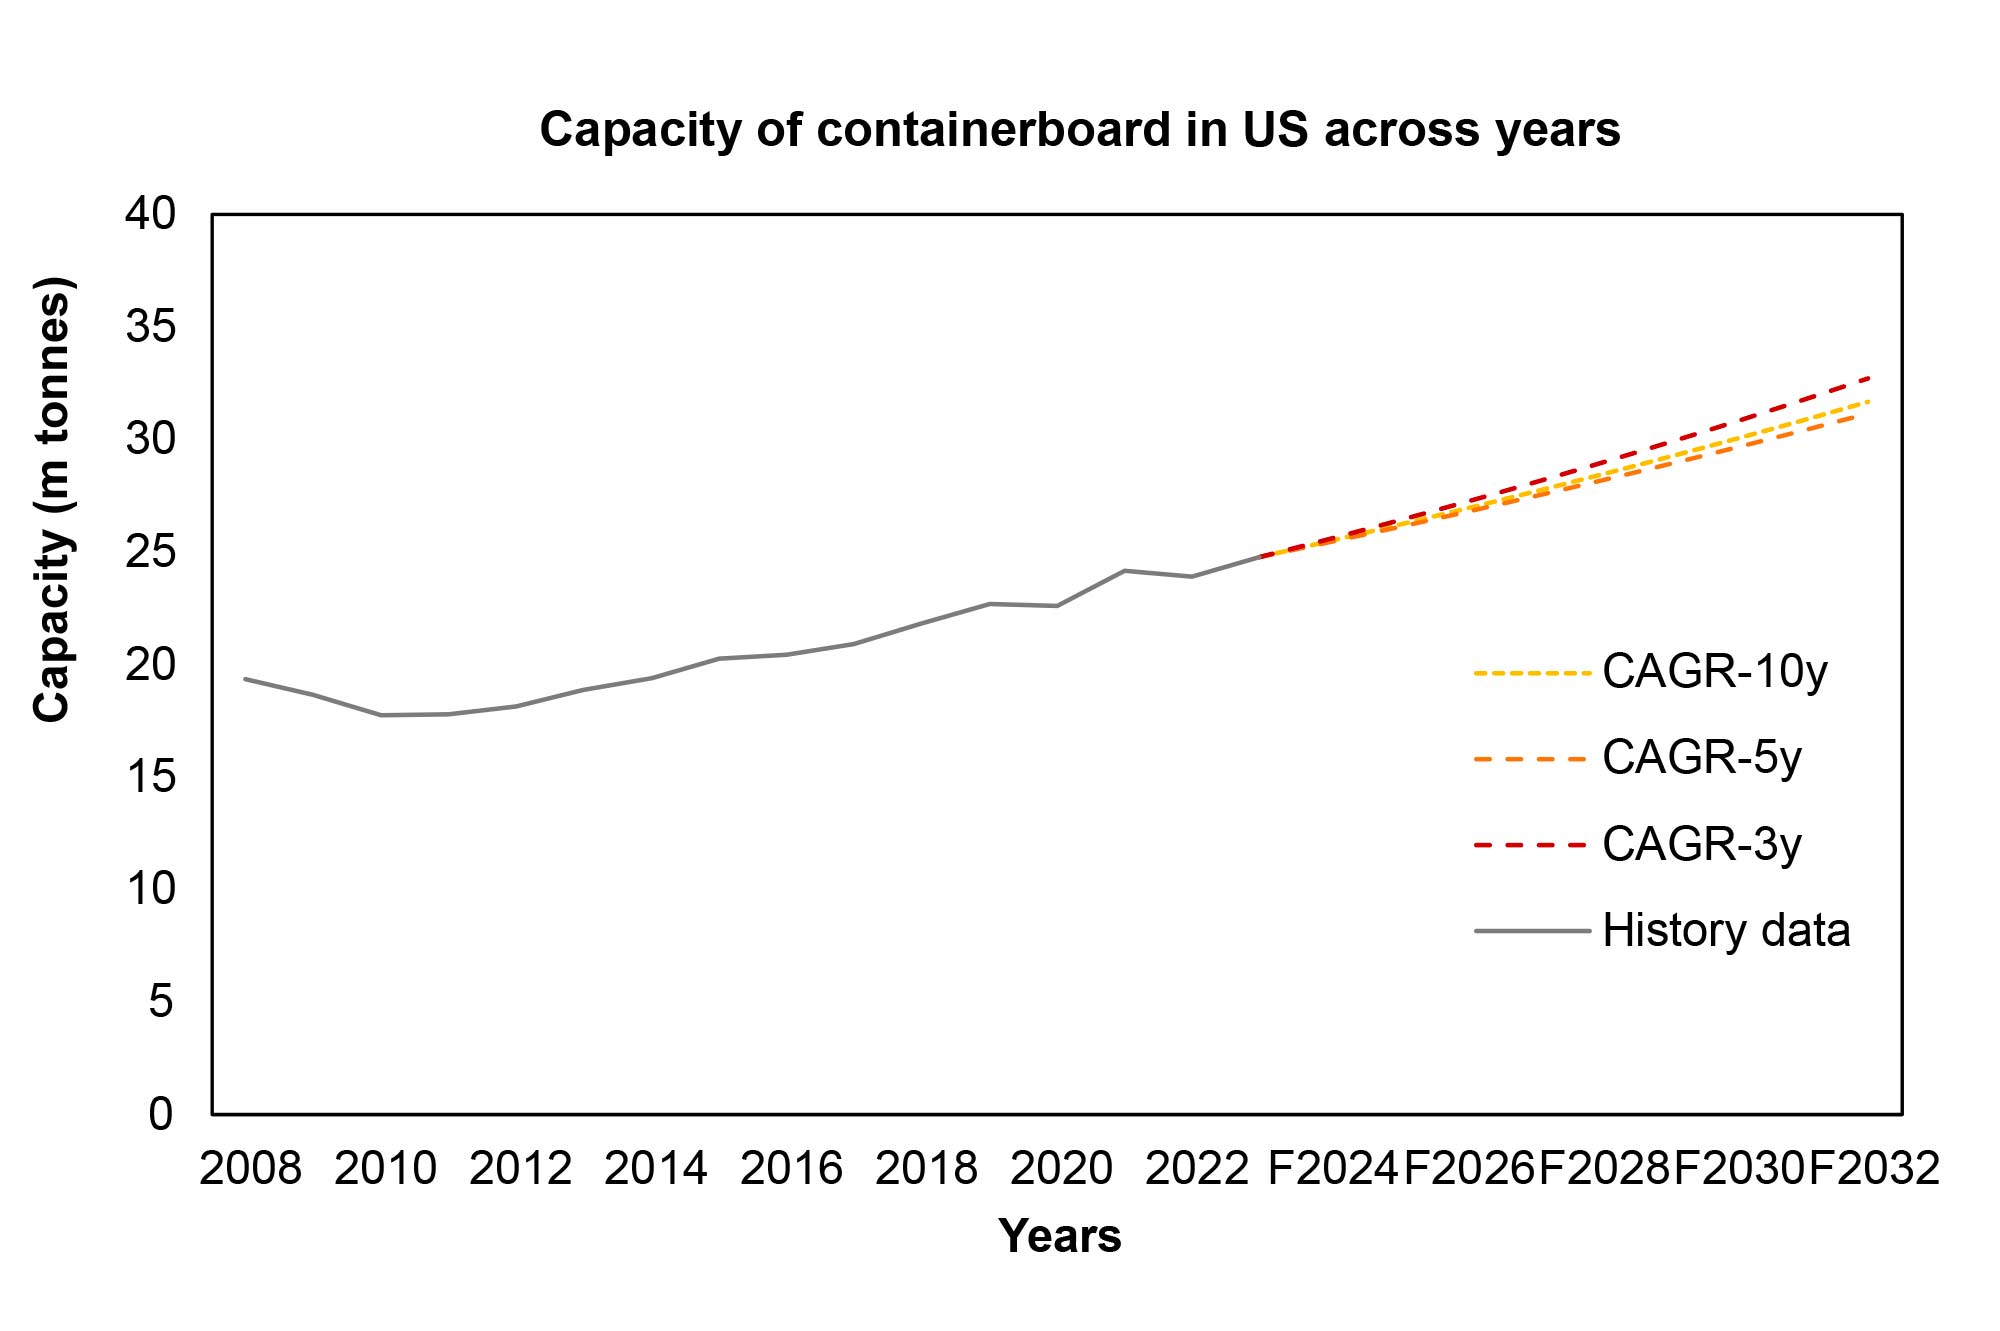 Figure 2: The capacity of containerboard in US across the years (Fisher International, 2023).